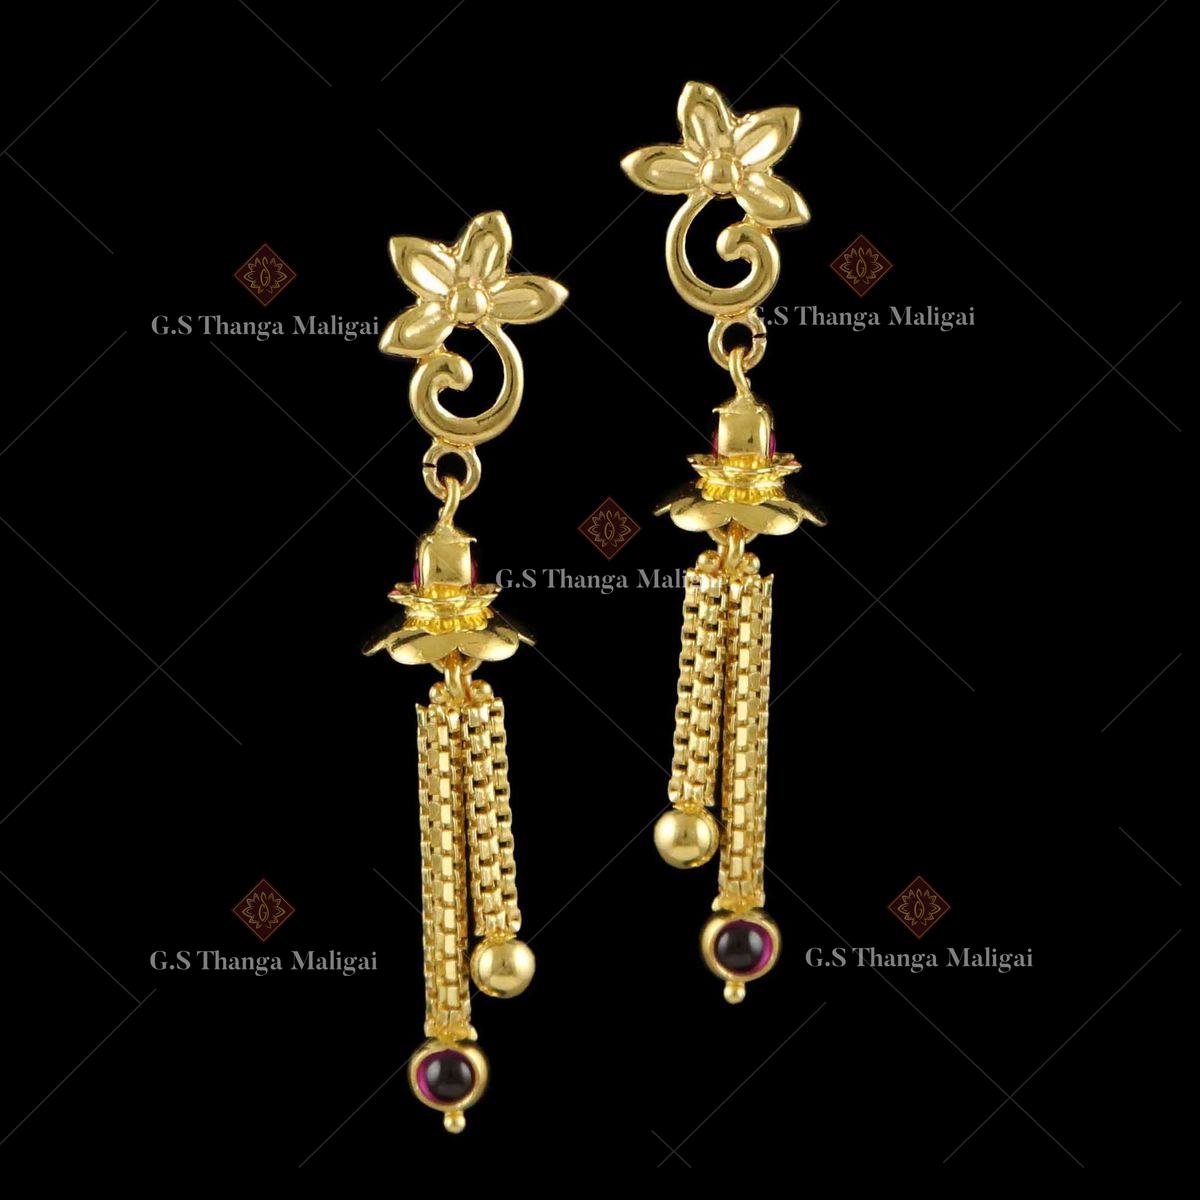 Personable Gold Women Casting Earring